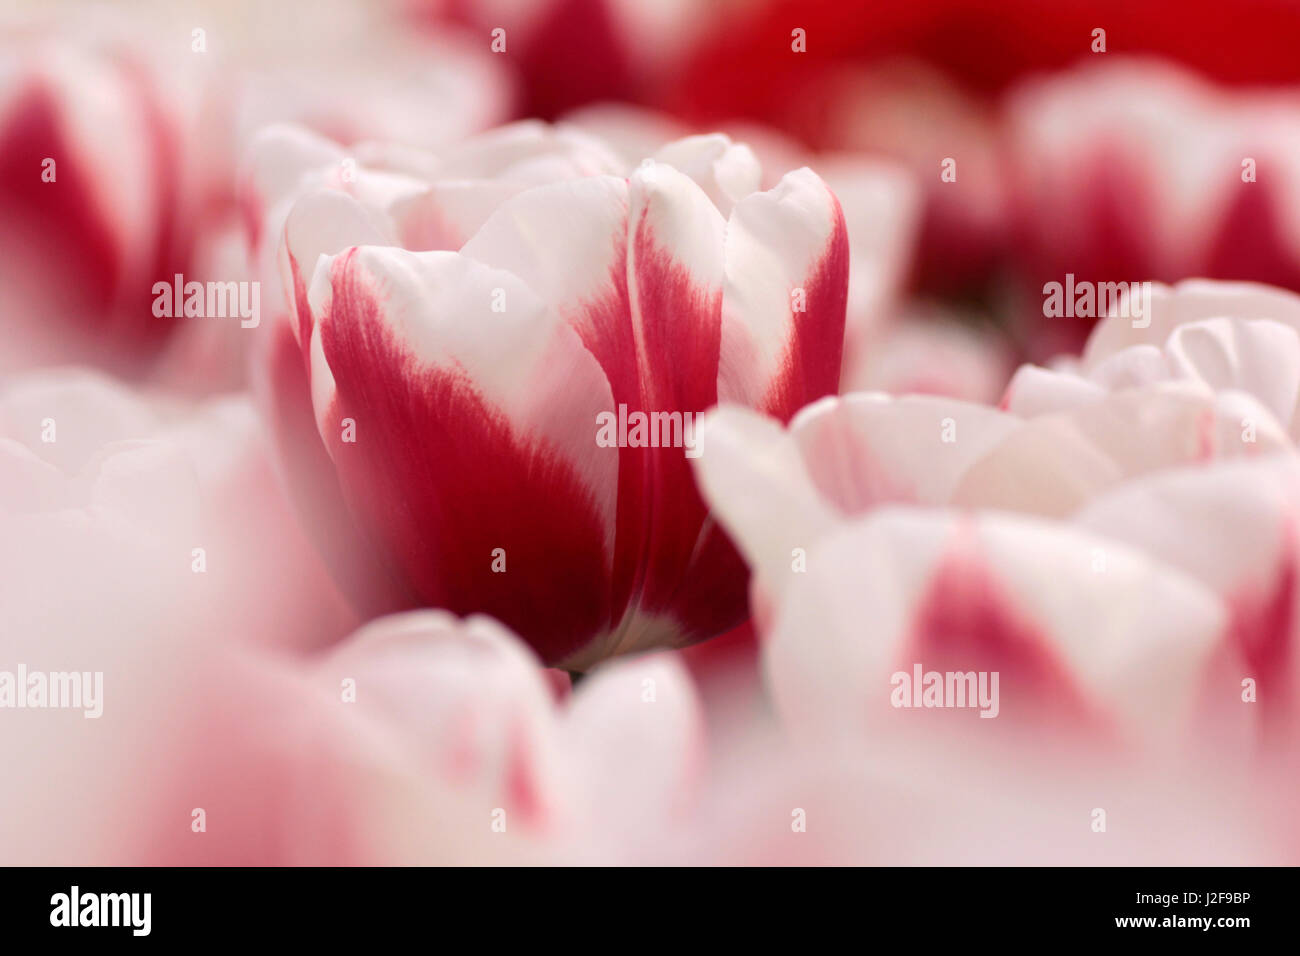 White and red tulips in close-up. Stock Photo